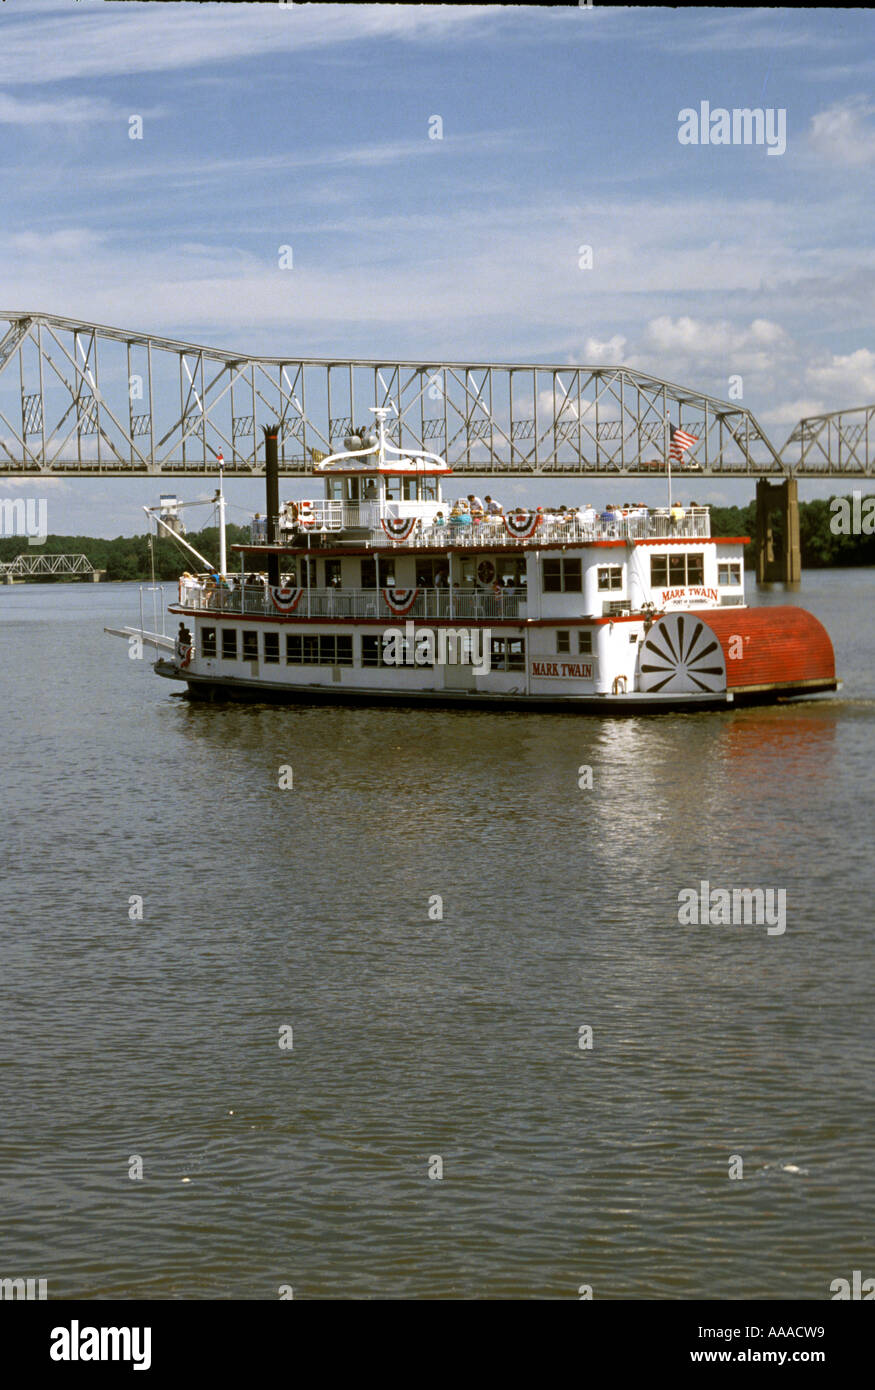 Mark Twain Paddle steam boat on the Mississippi River at Hannibal Missouri MO Stock Photo